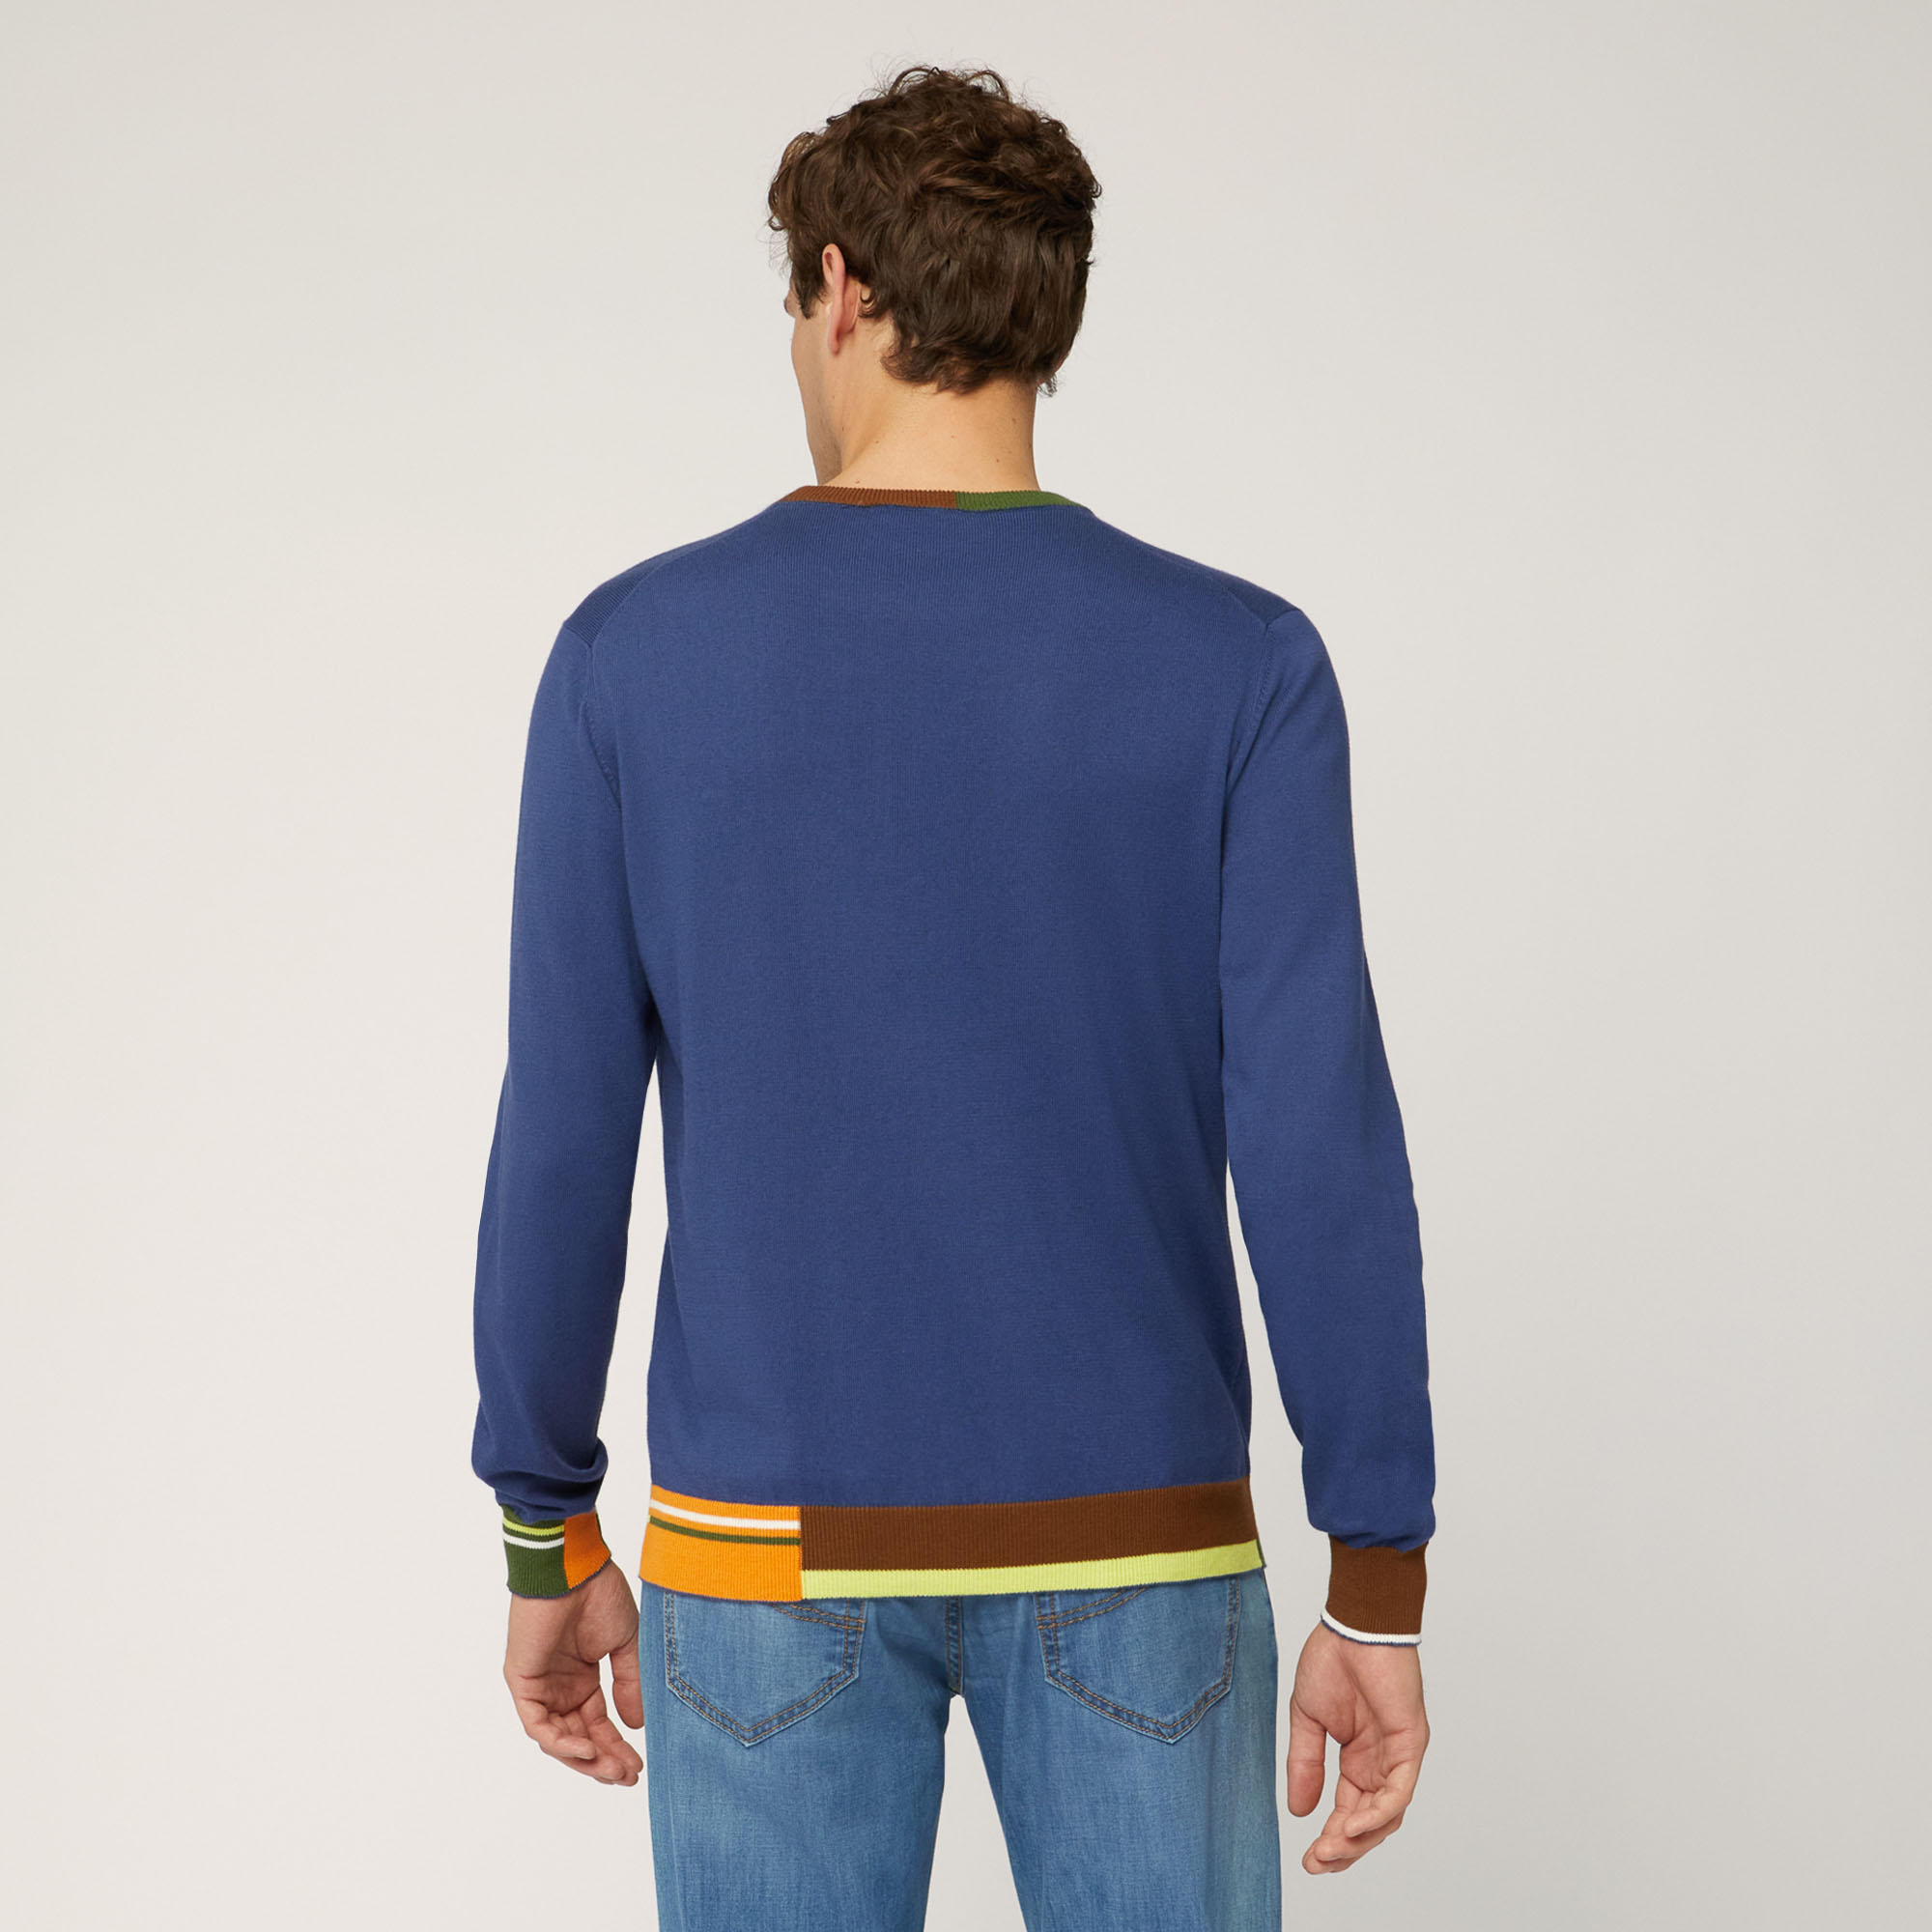 Organic Cotton Crew Neck Pullover with Color Block Details